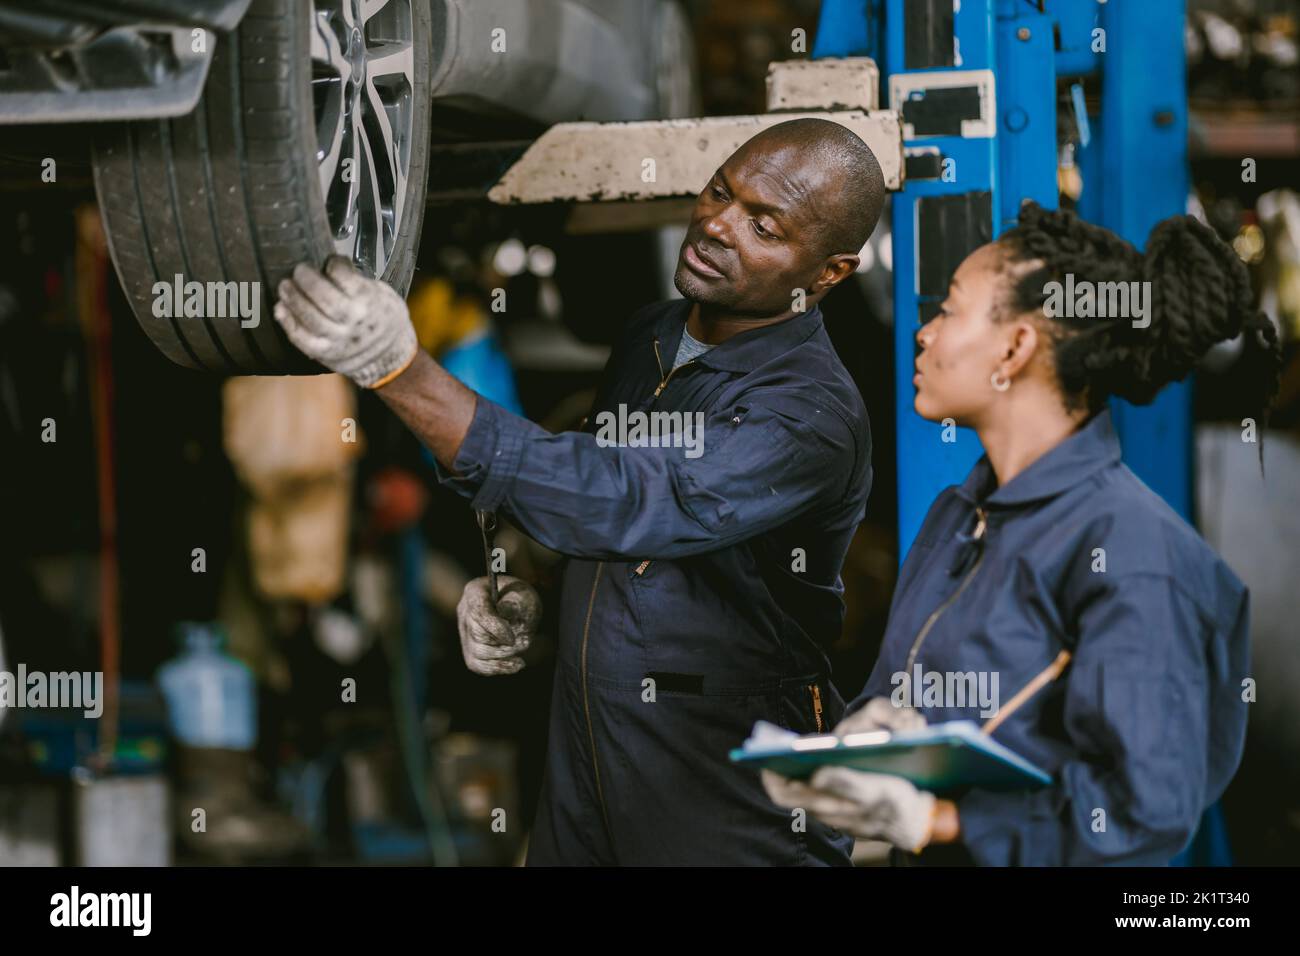 Auto garage worker Black African working together to fix service car vahicle wheel support together Stock Photo